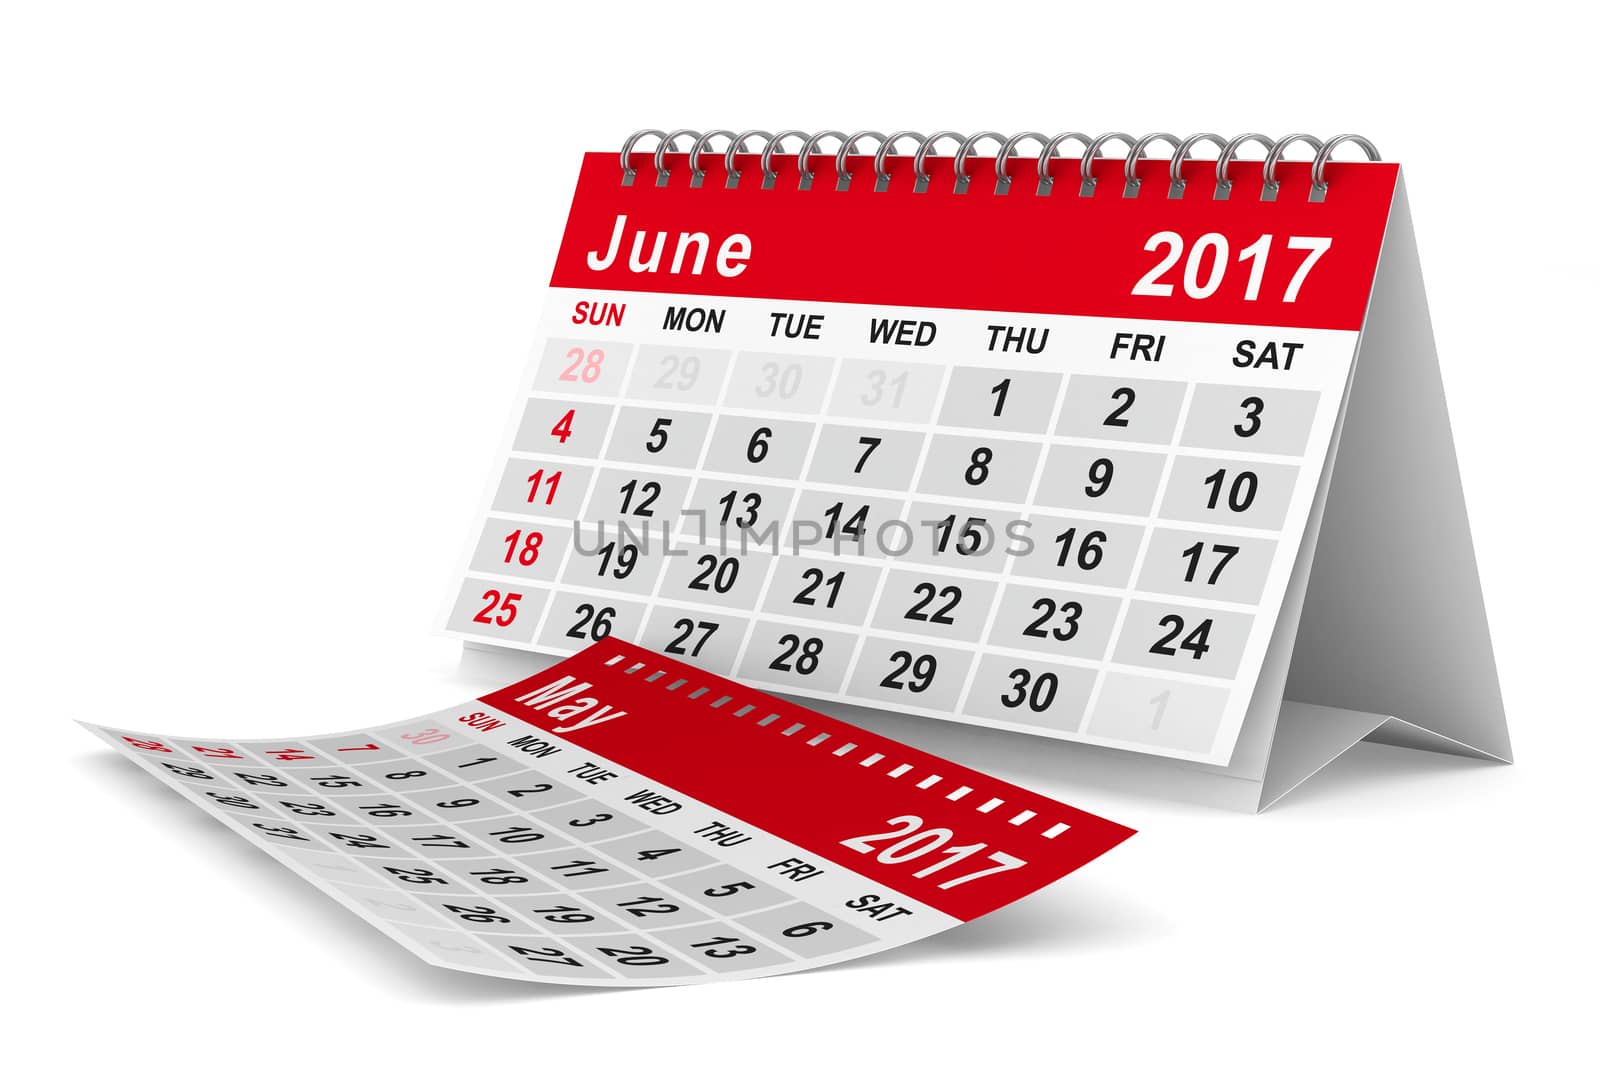 2017 year calendar. June. Isolated 3D image